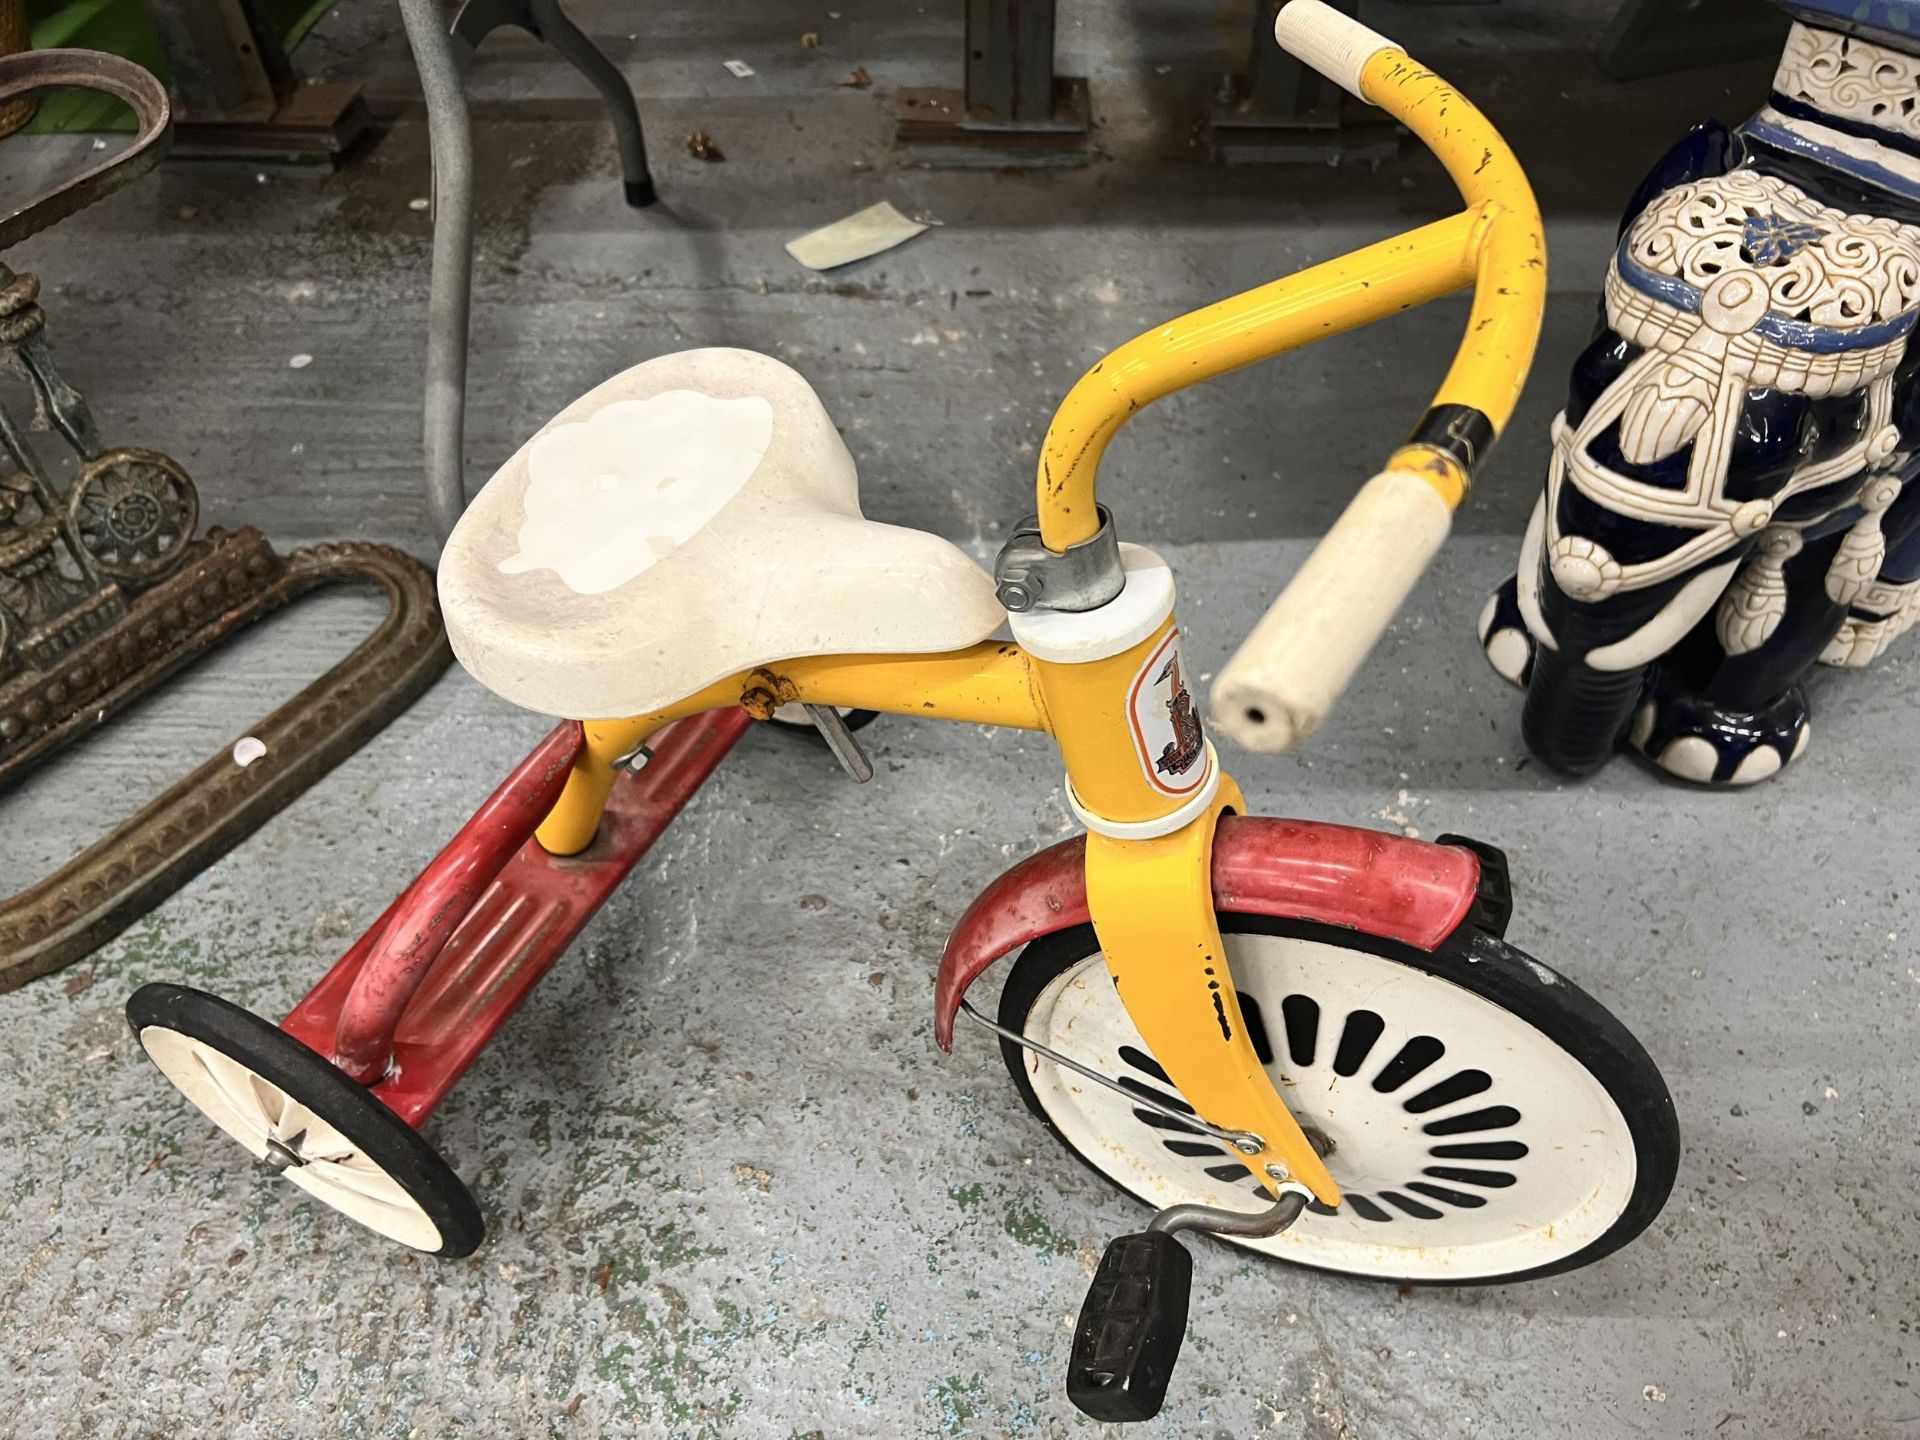 A CHILD'S VINTAGE RALEIGH TRICYCLE - Image 4 of 4